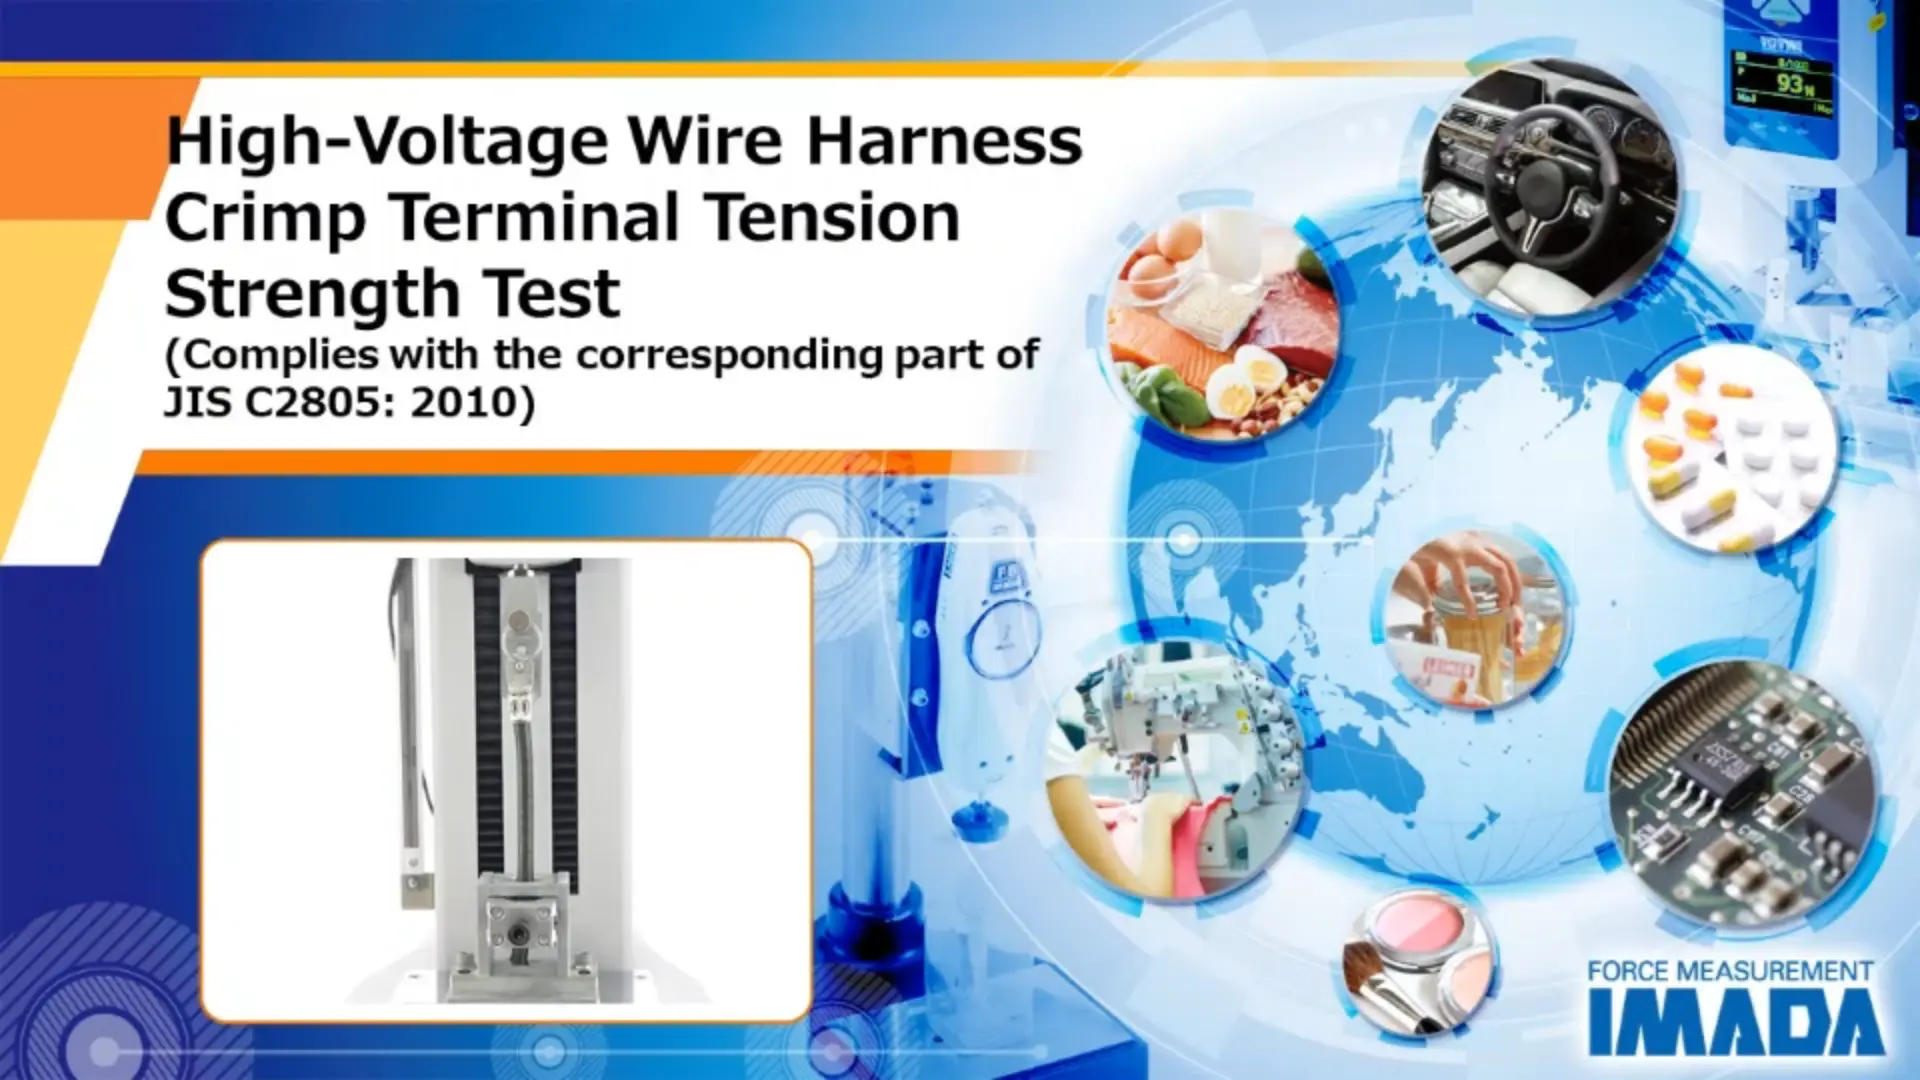 High-Voltage Wire Harness Crimp Terminal Tension Strength Test (Complies with the corresponding part of JIS C2805:2010)